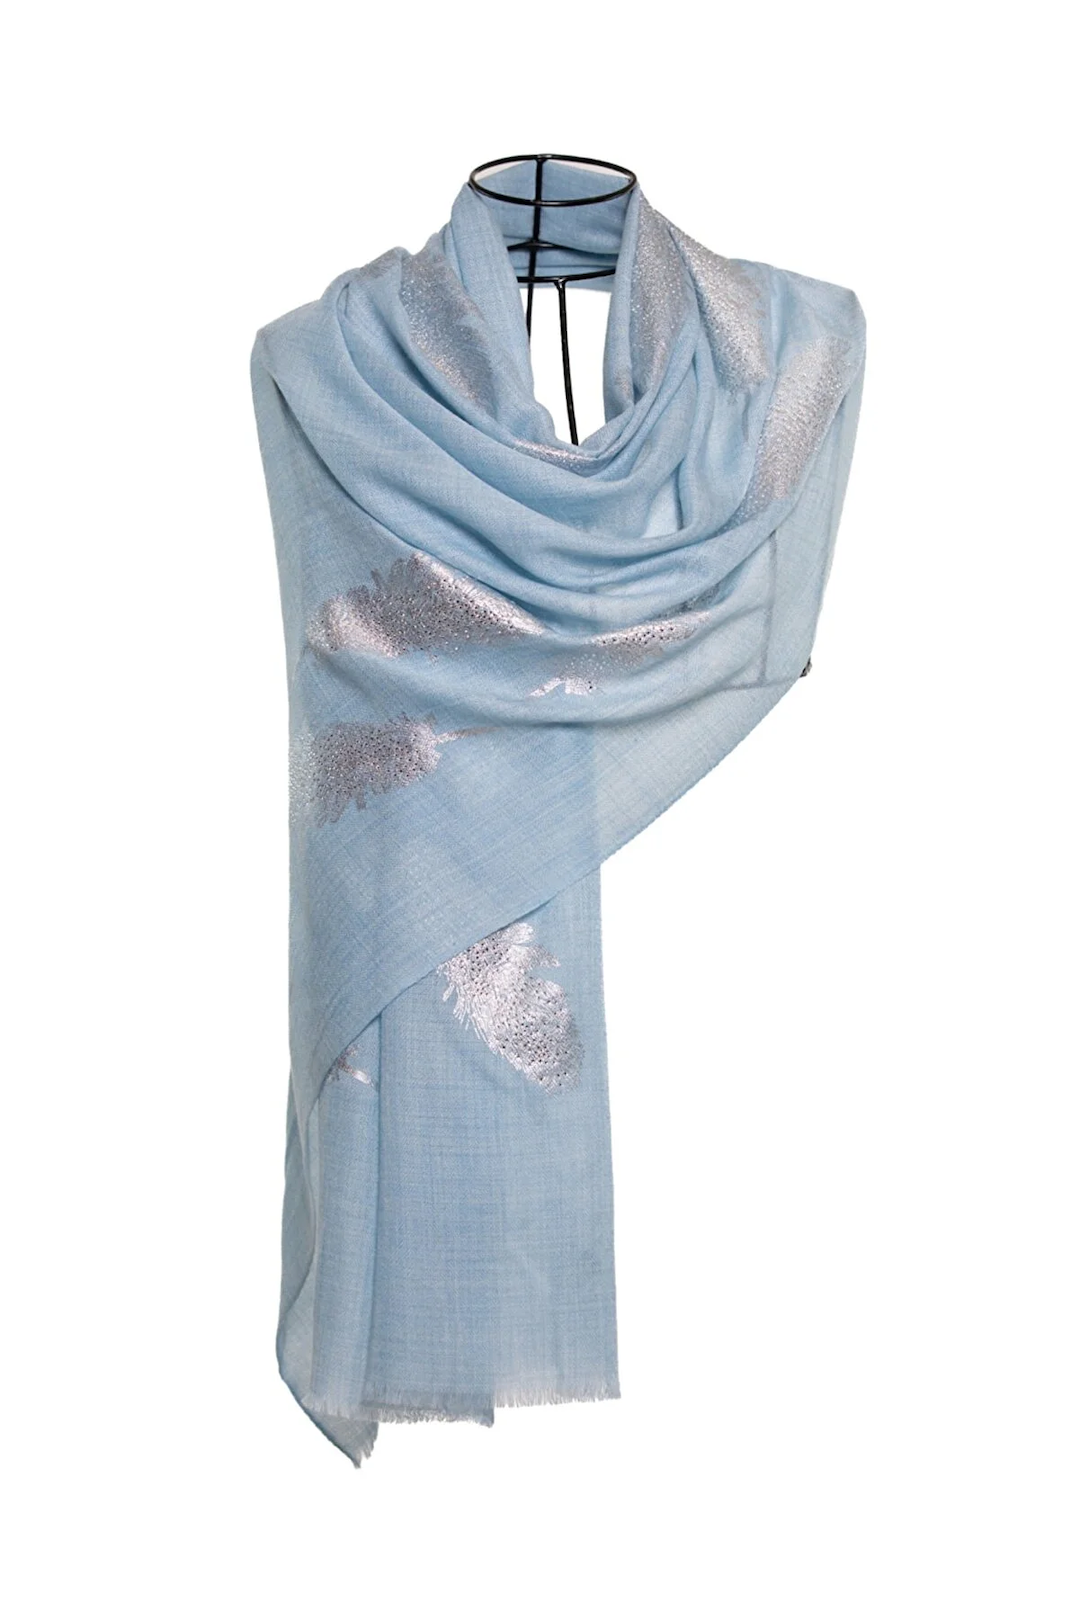 Angel Feathers Crystal Feathers Shawl Stole - Sky Blue Silver